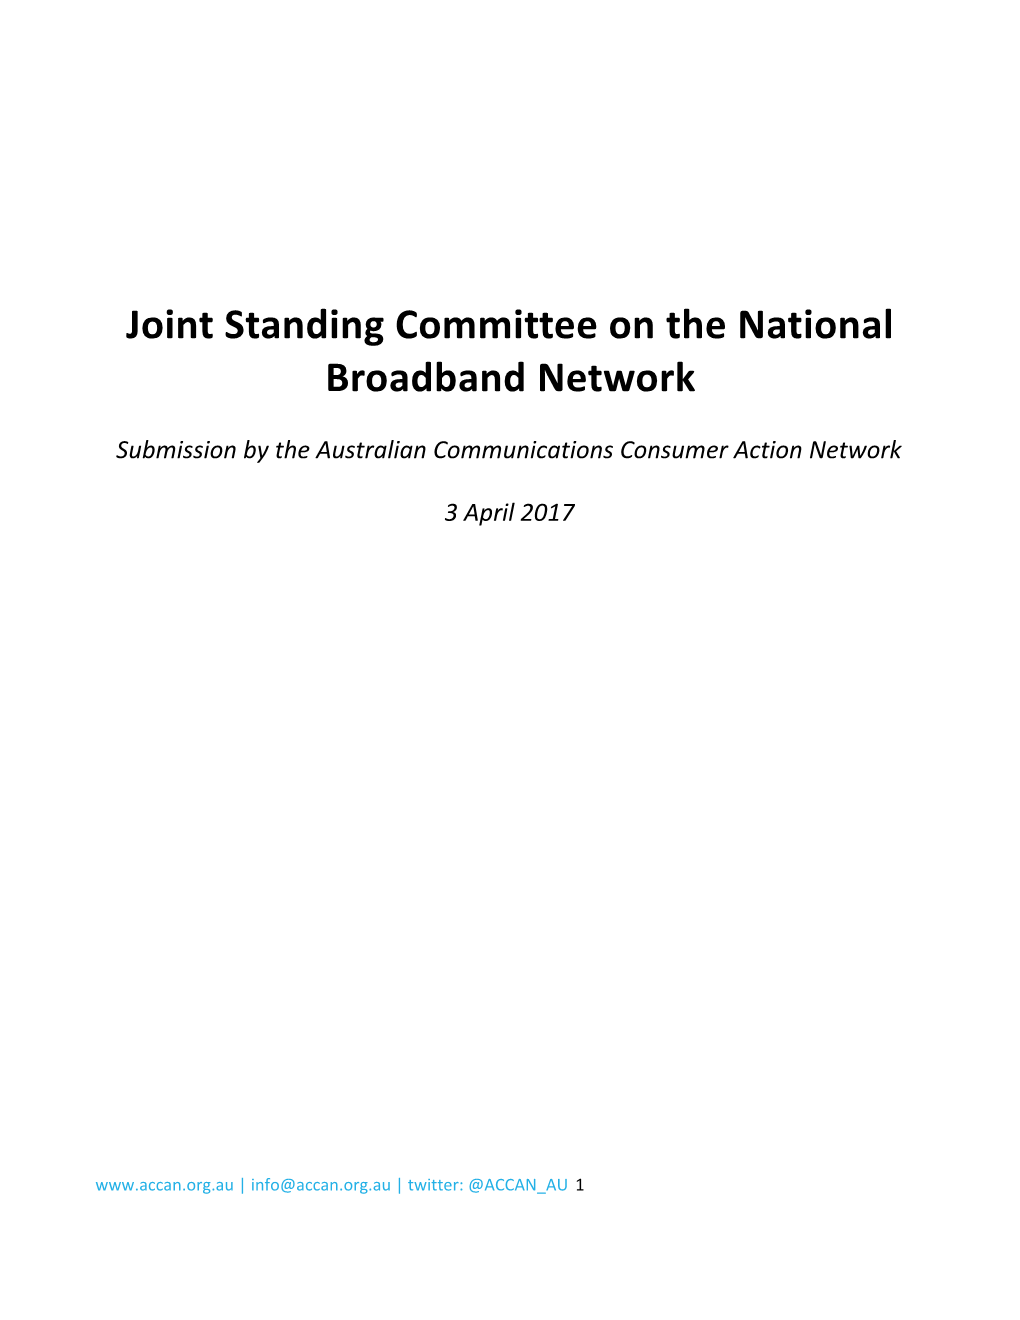 Joint Standing Committee on the National Broadband Network